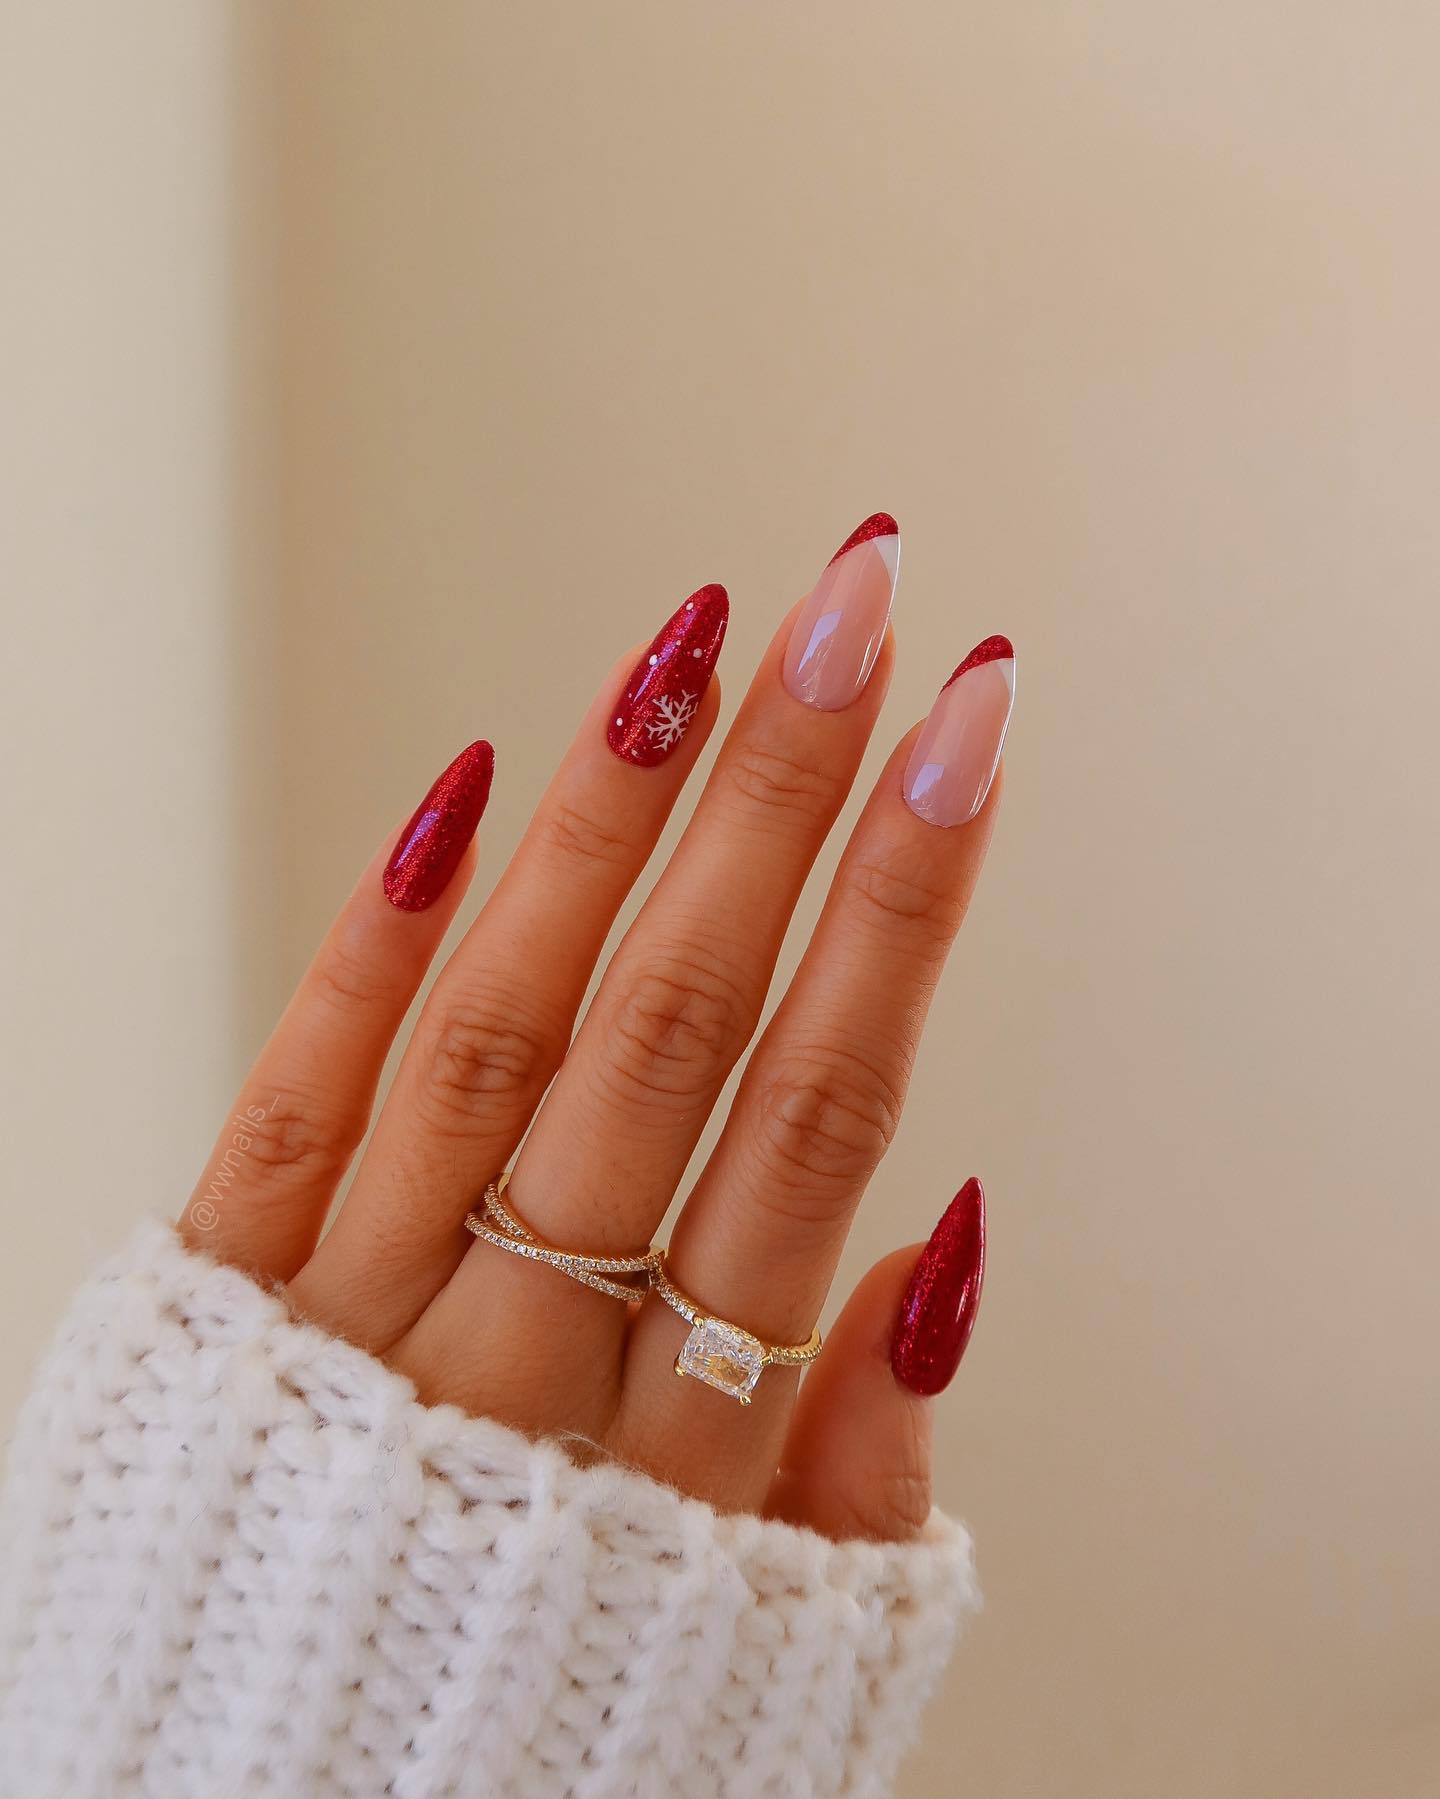 Sparkly Red Tip Nails